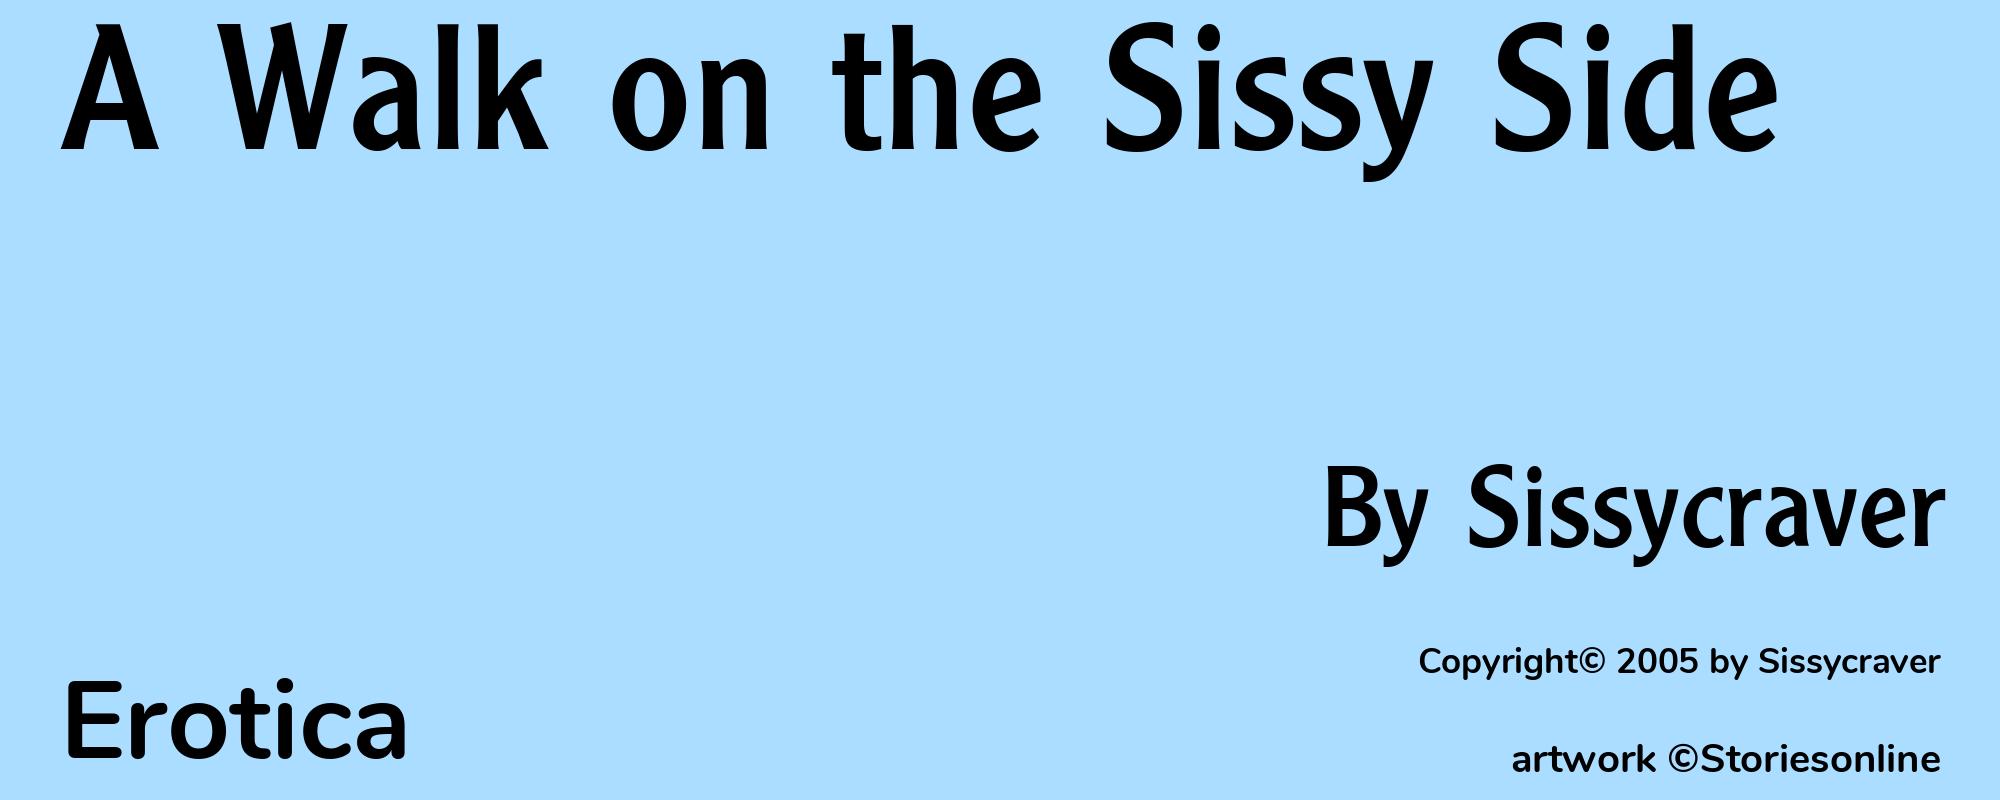 A Walk on the Sissy Side - Cover